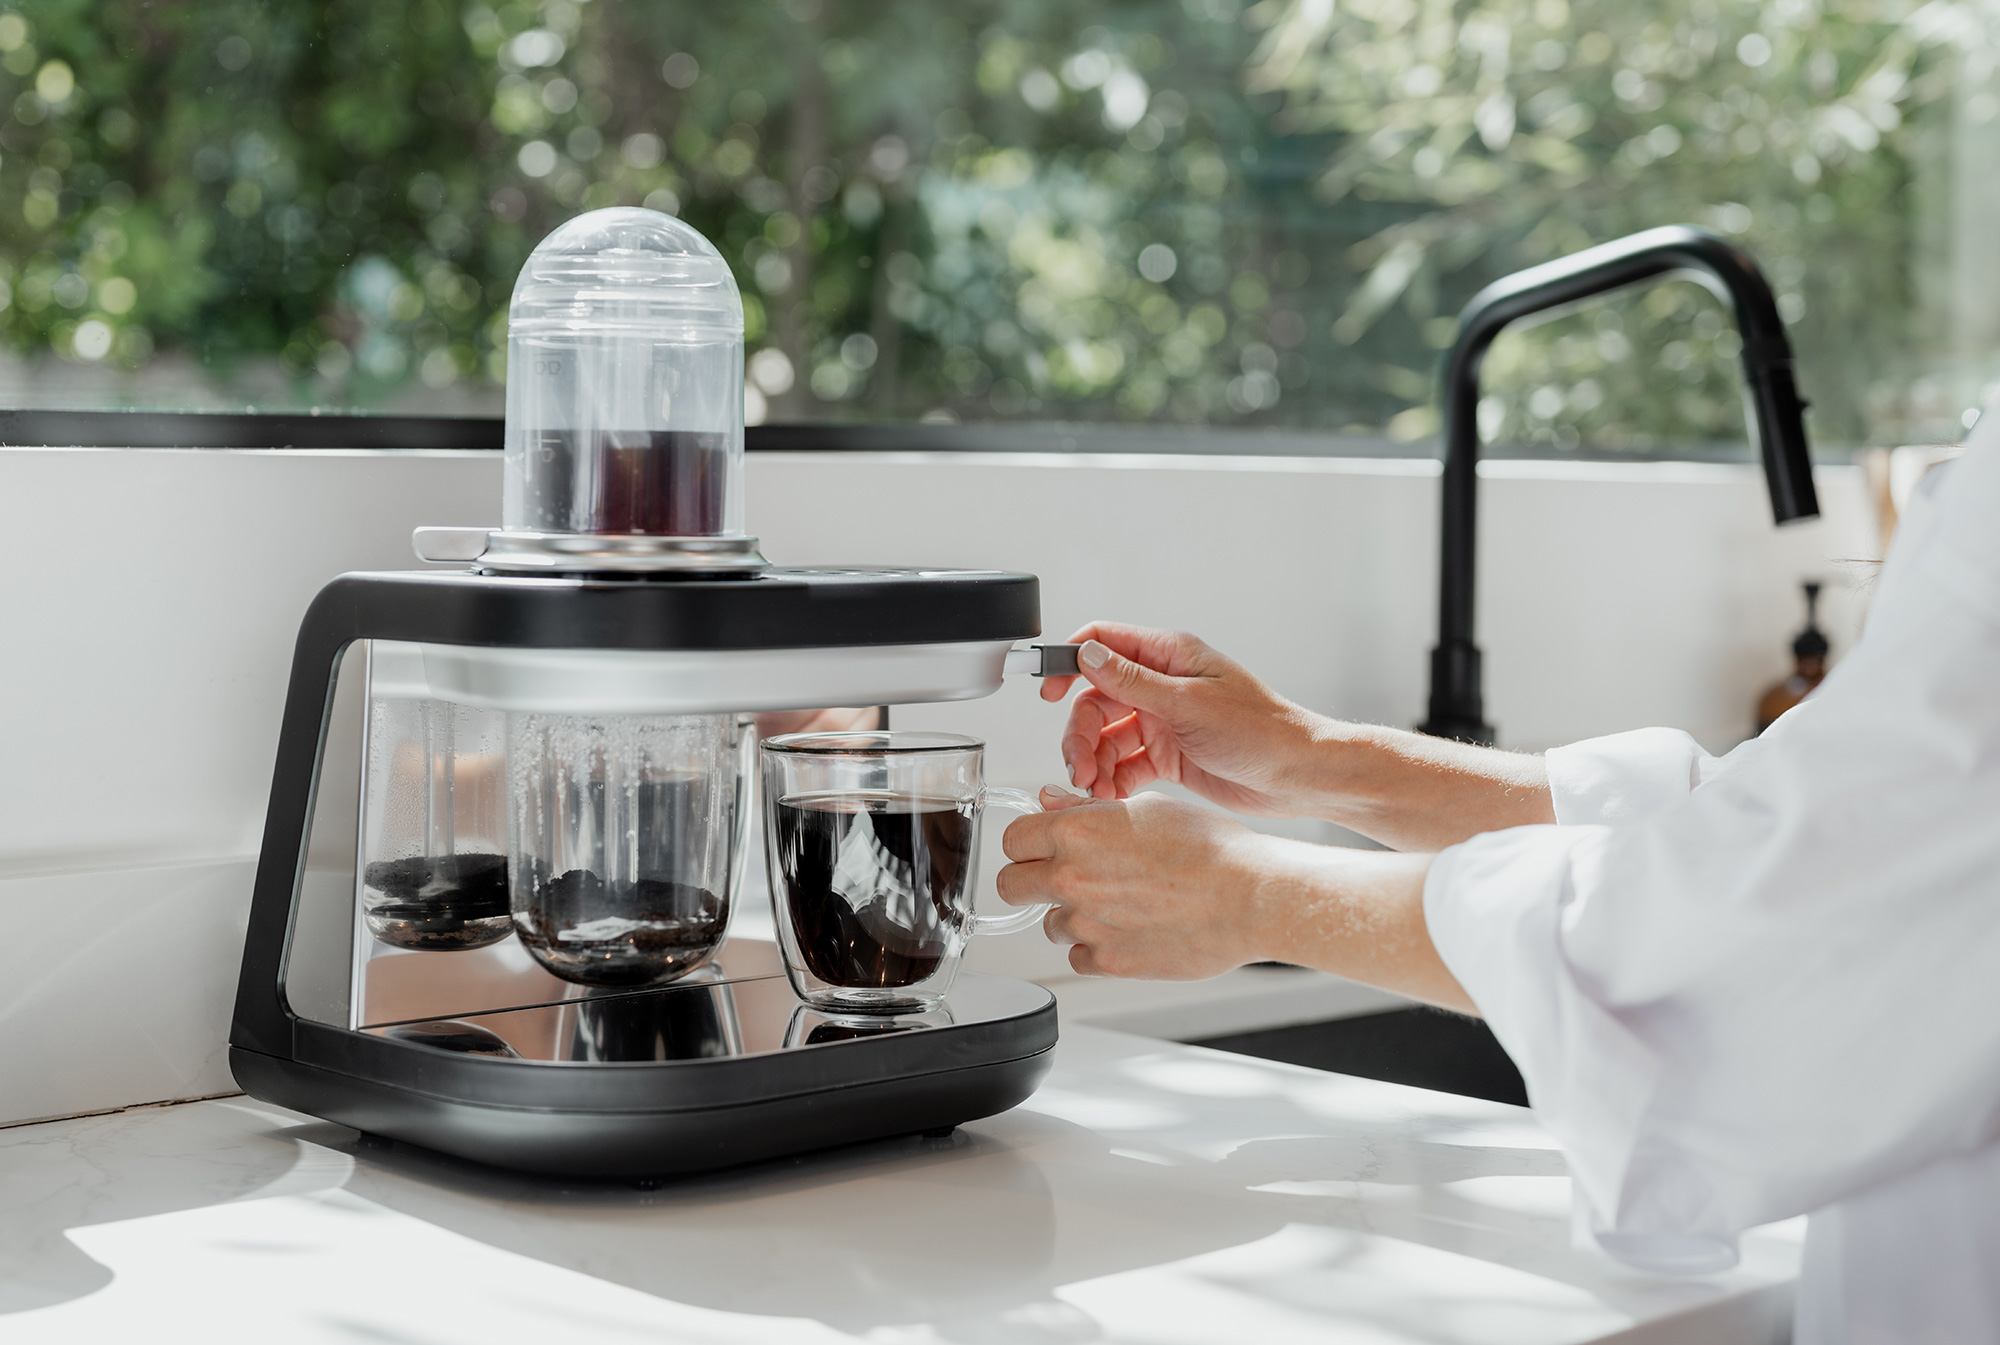 https://www.gessato.com/wp-content/uploads/2022/05/siphonysta-automated-siphon-coffee-maker-15.jpg